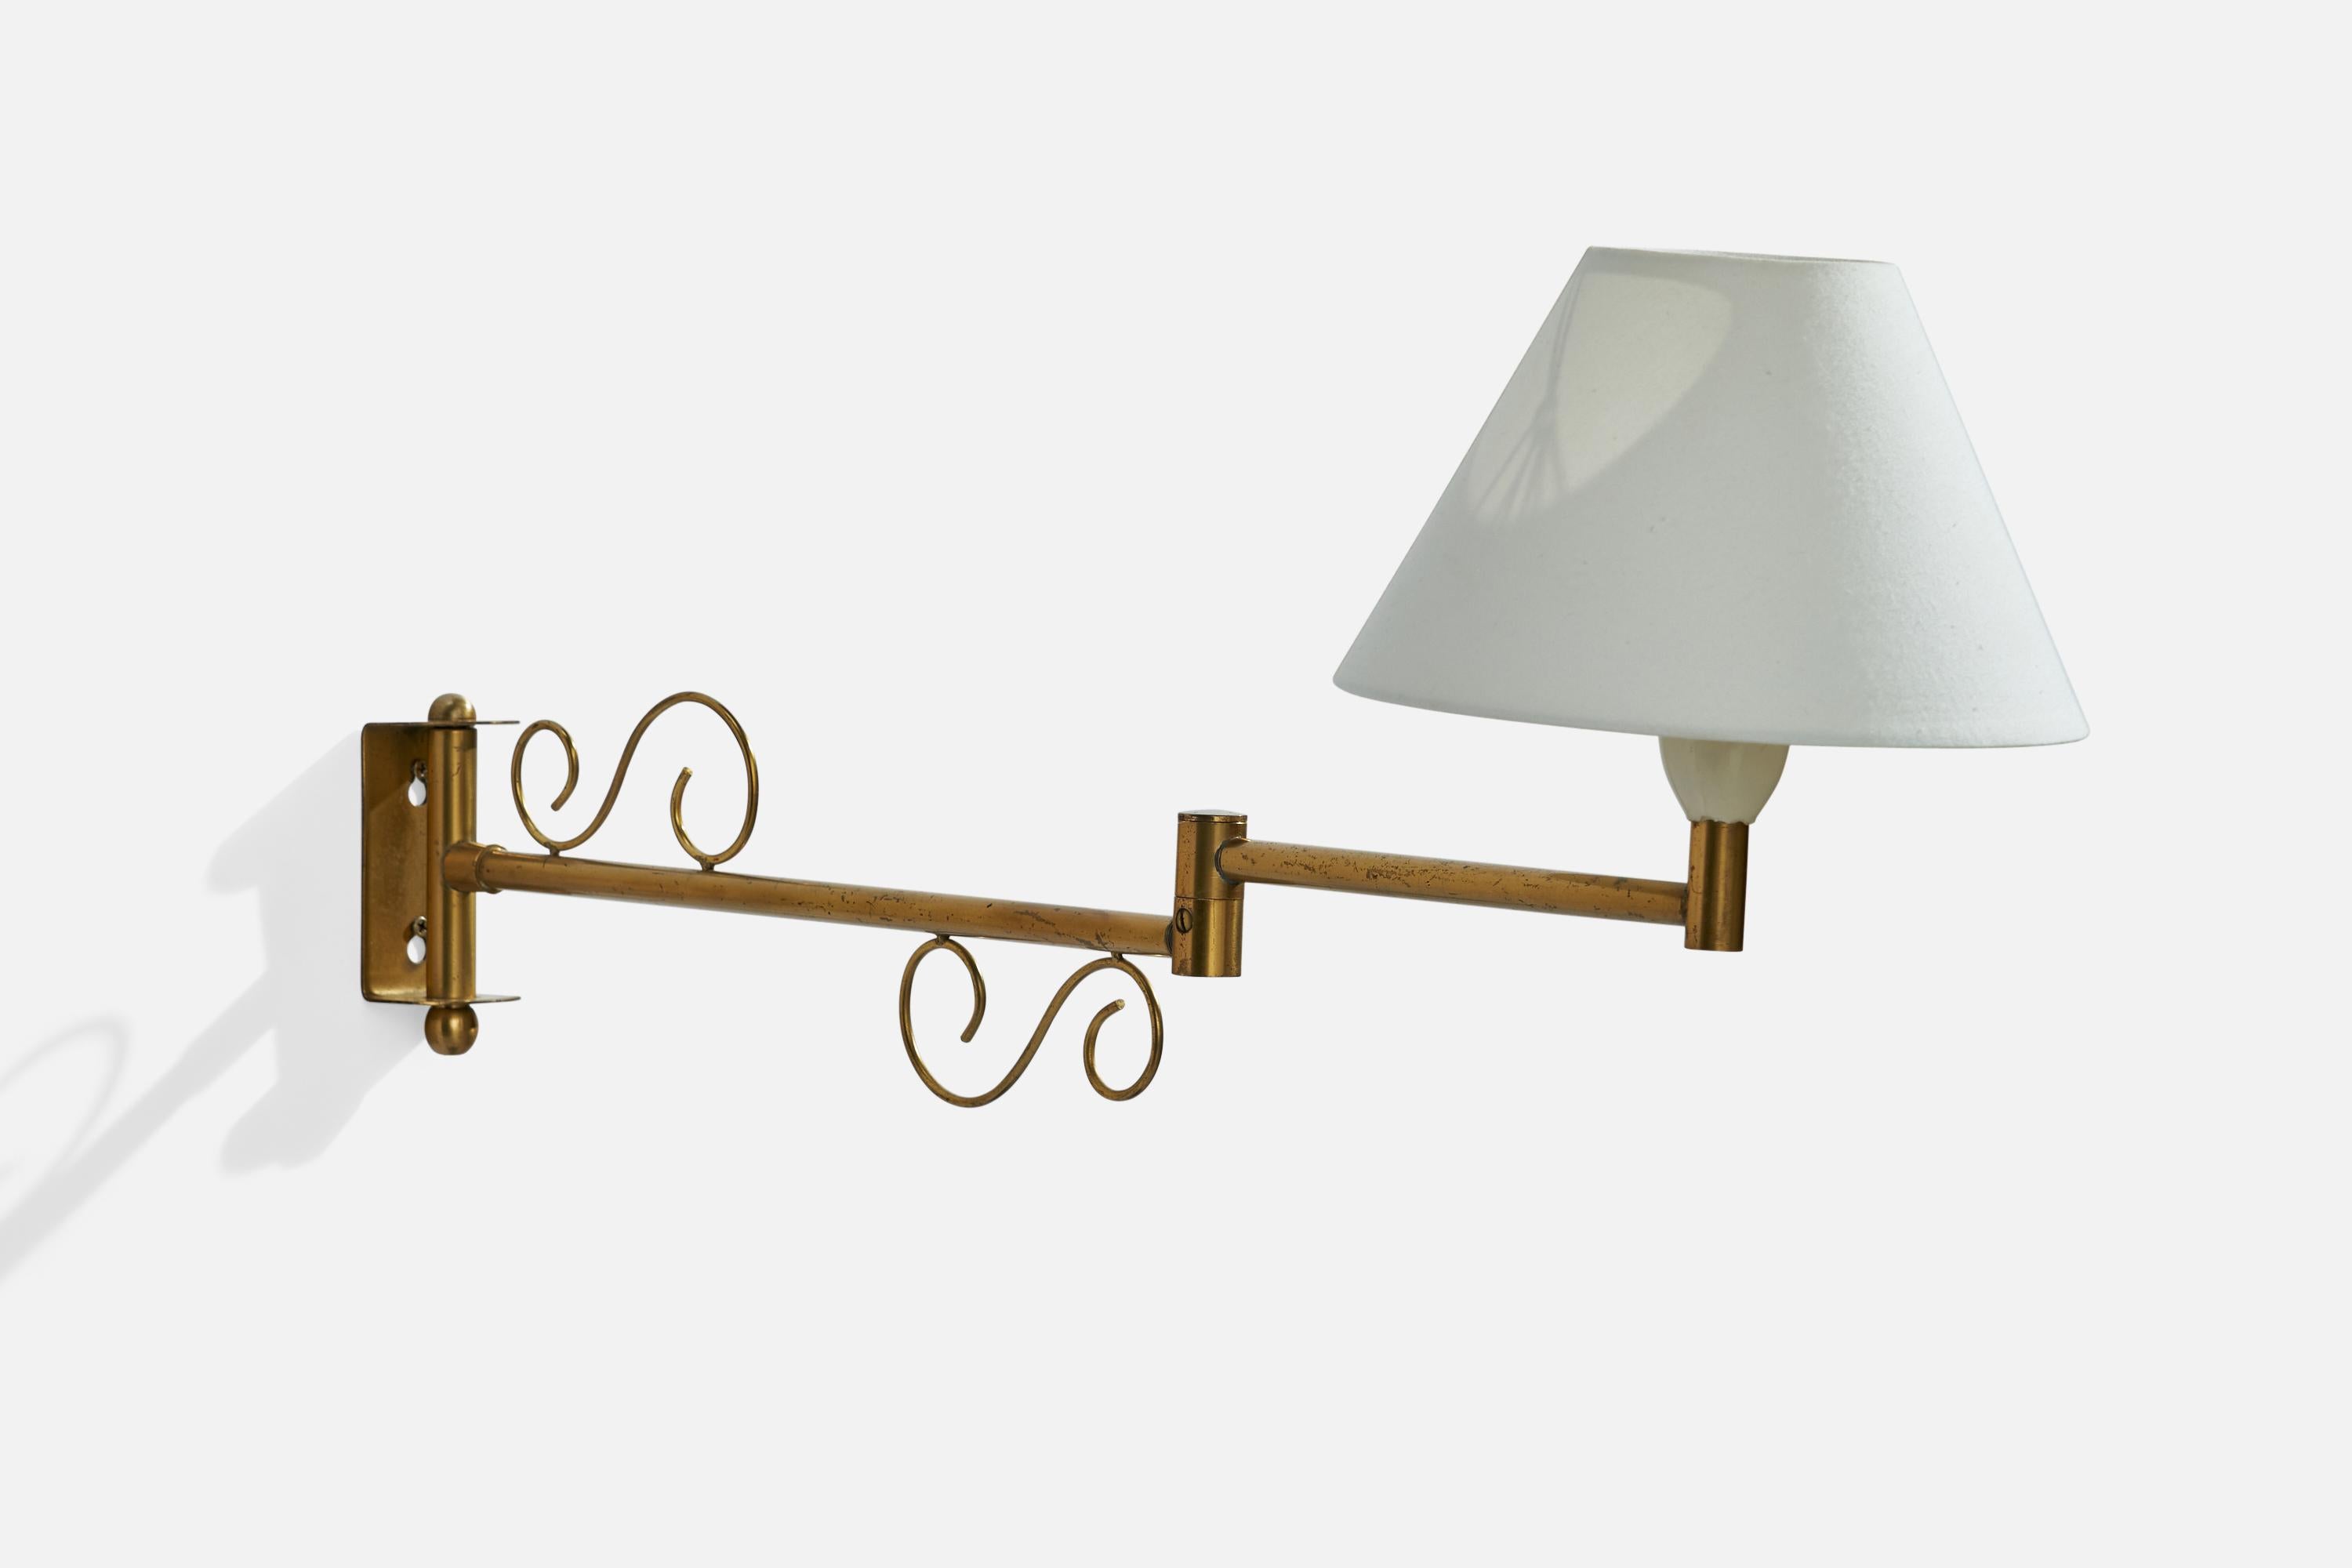 An adjustable brass and white fabric wall light designed and produced in Denmark, 1930s.

Dimensions variable.
Overall Dimensions (inches): 4.25” H x 15” W x 22” D
Back Plate Dimensions (inches): 4.25”  H x 15”  W x .25”  D
Bulb Specifications: E-26